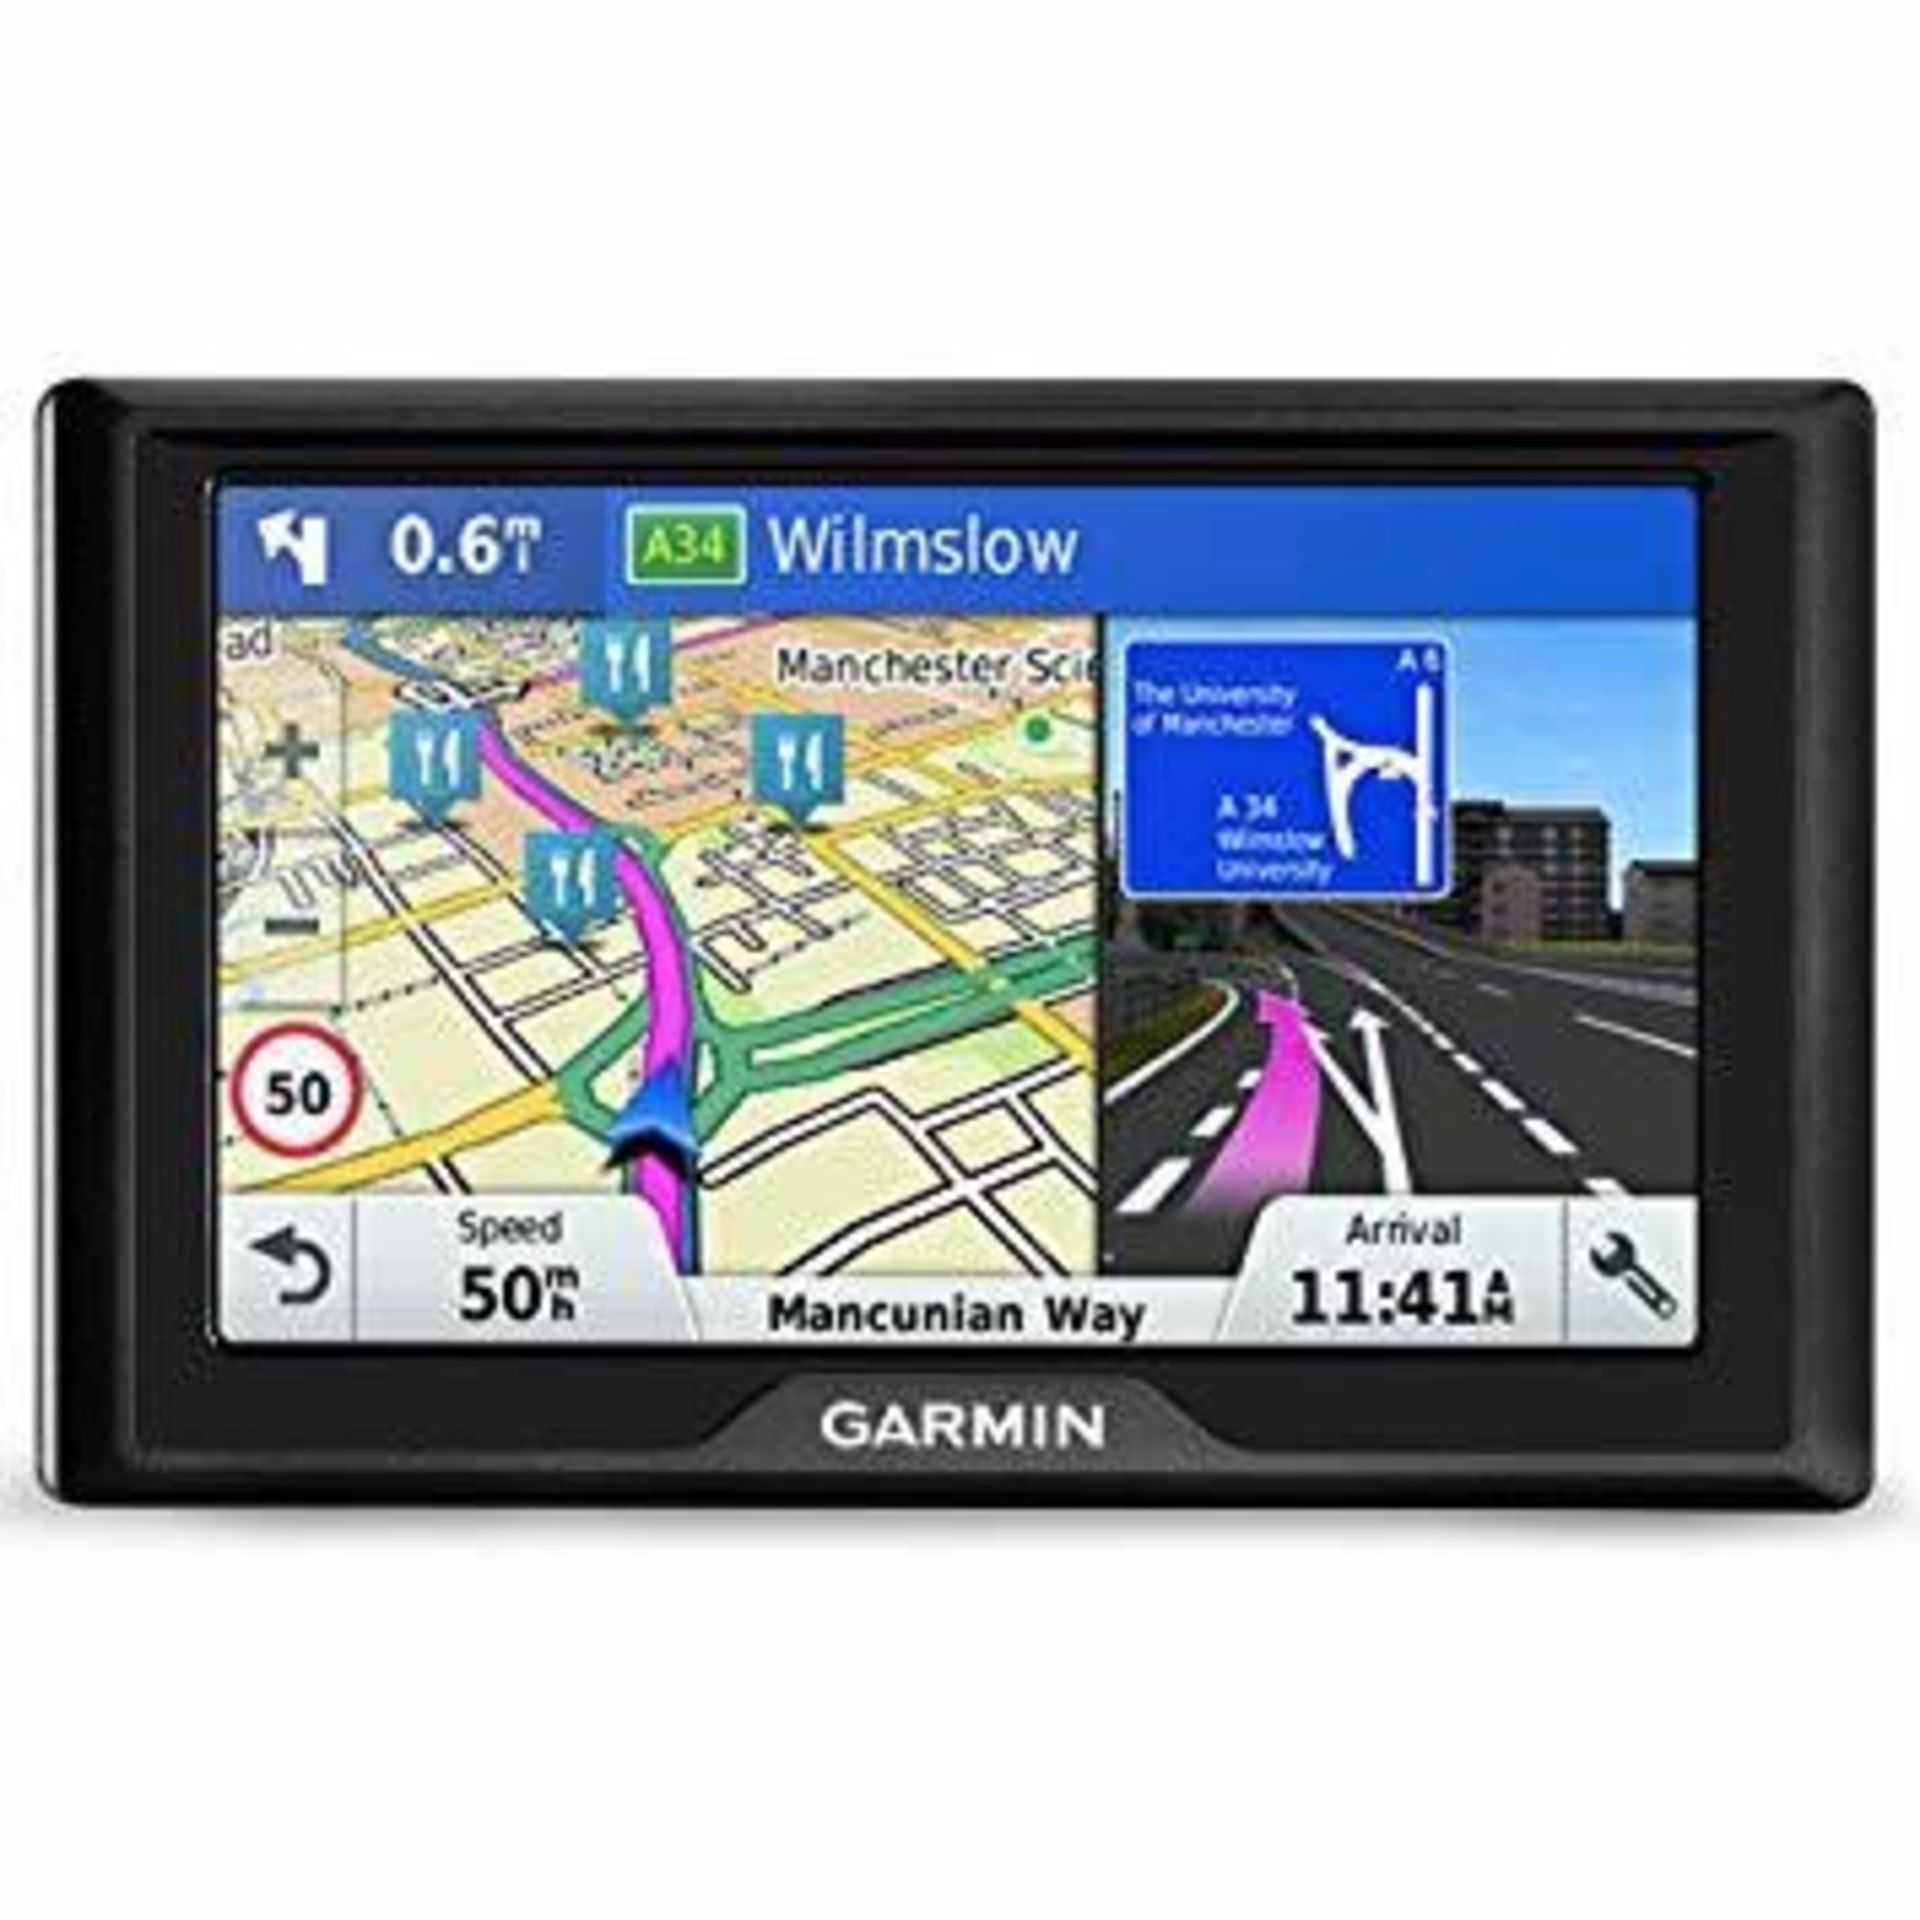 17 Boxed unused Garmin 51 LMT-S Satellite Navigation Systems, BrightHouse model number PEGARLMTS